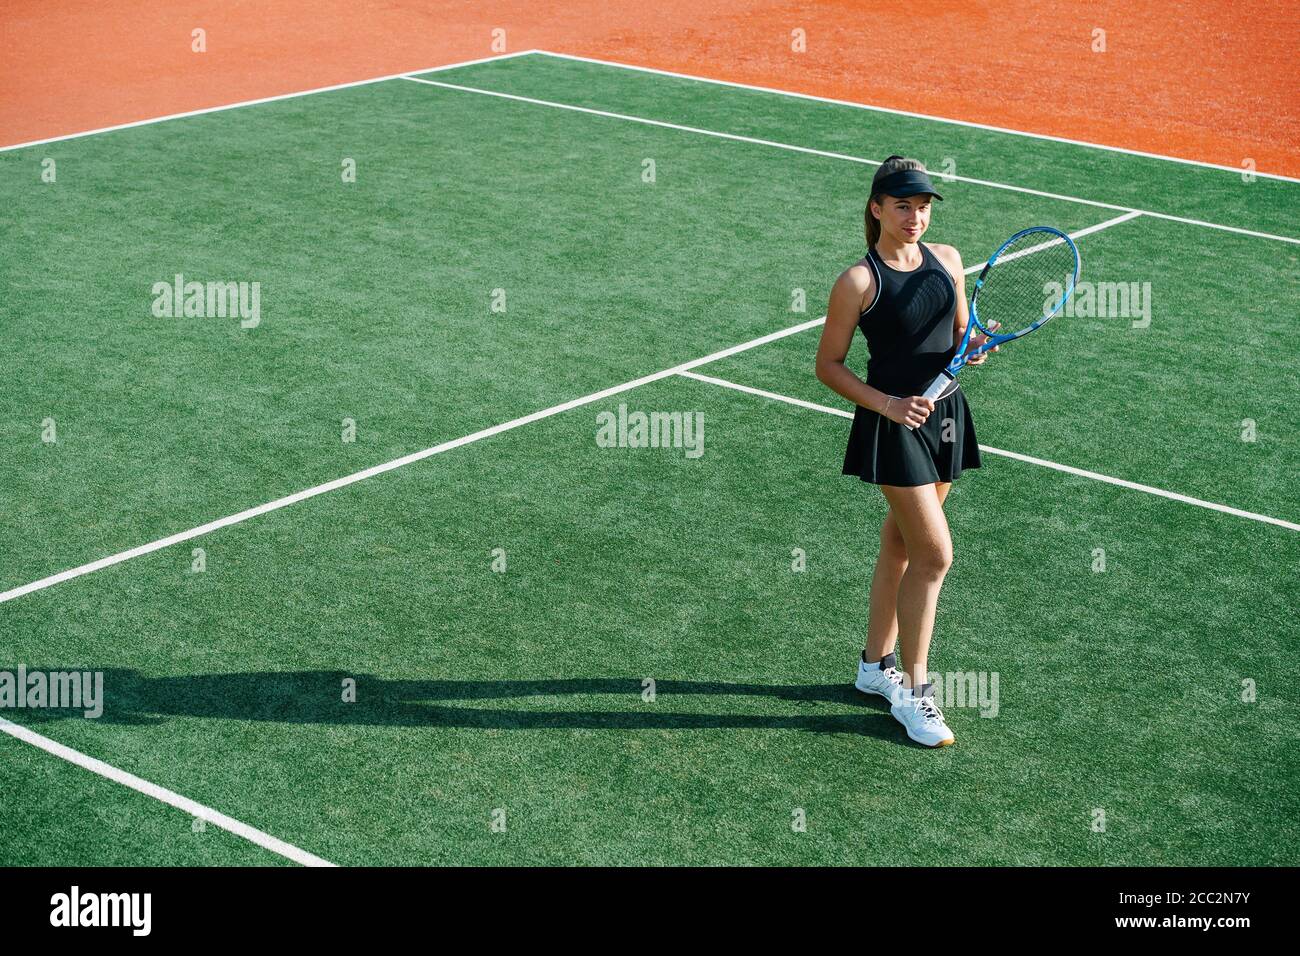 Sixting year old girl smiling in the middle of a brand new tennis court. Stock Photo